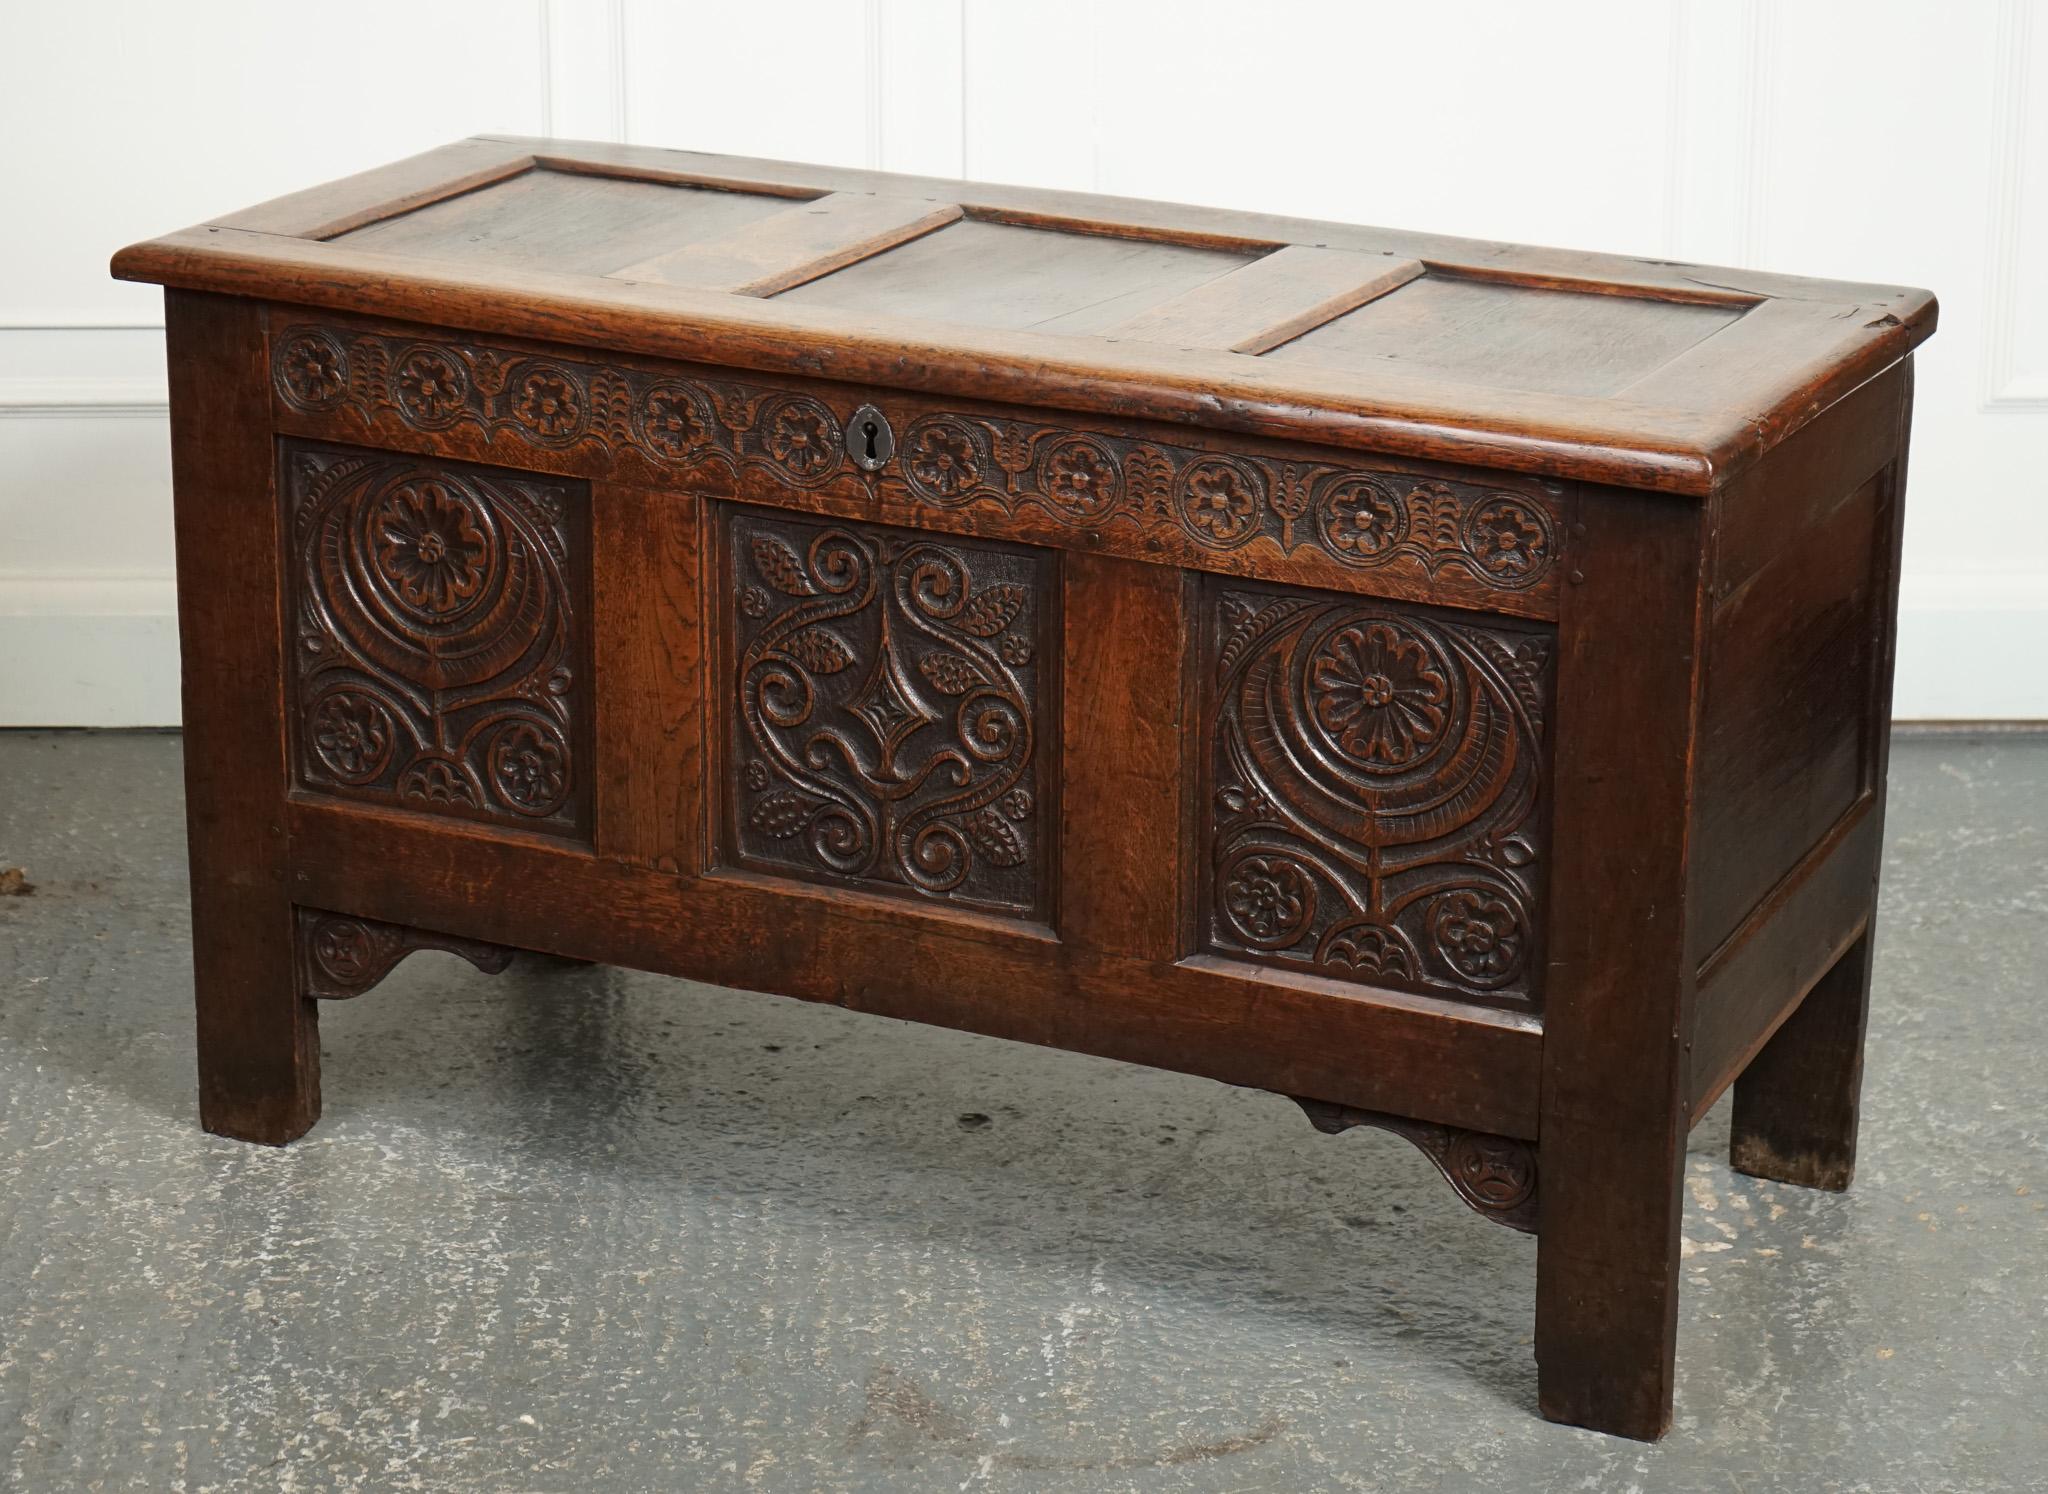 We are delighted to offer for sale this Exquisite 17th Century Carved Antique Oak Trunk Chest Coffer.

 A true treasure from the past. 

Crafted during the 1600s, this chest showcases exceptional craftsmanship and intricate detailing that reflects